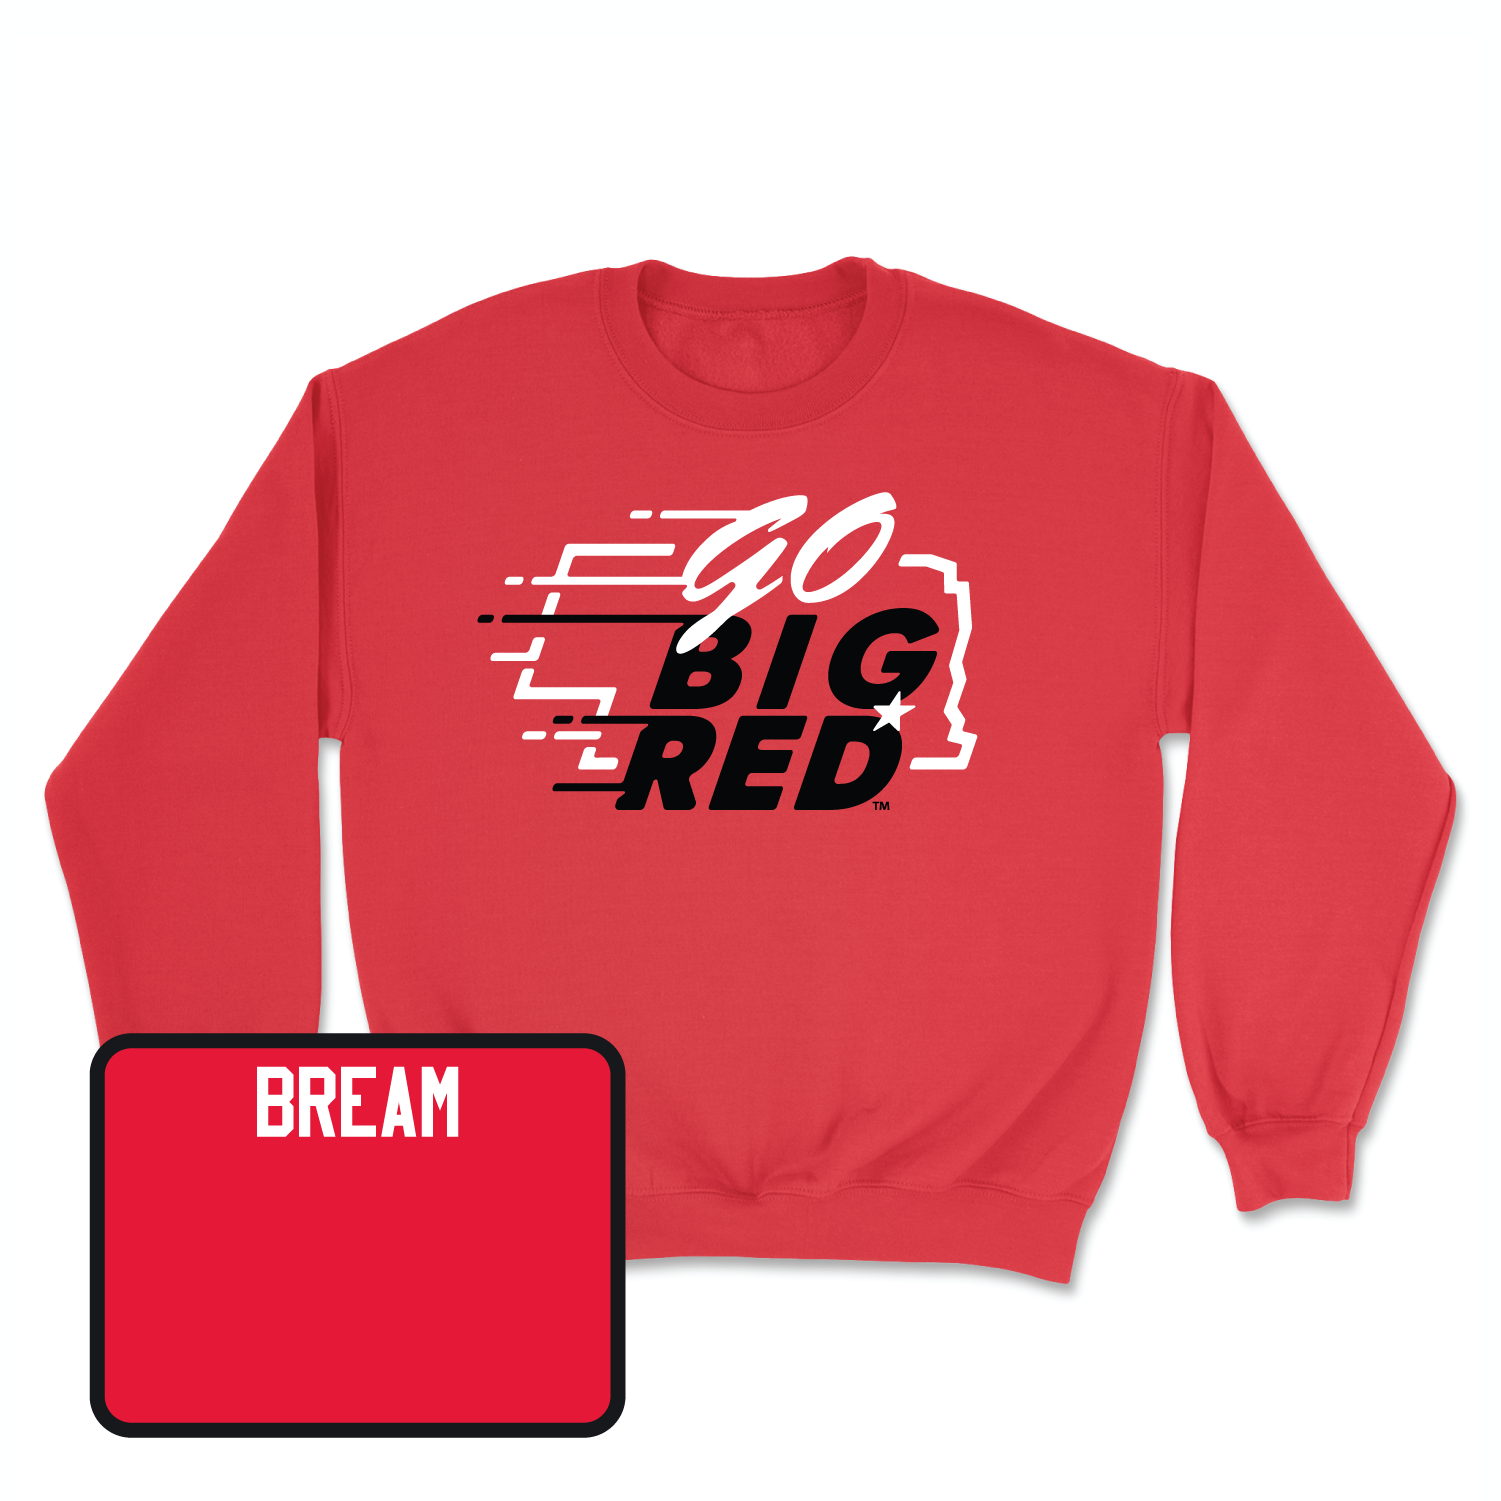 Red Women's Golf GBR Crew Youth Large / Brooke Bream